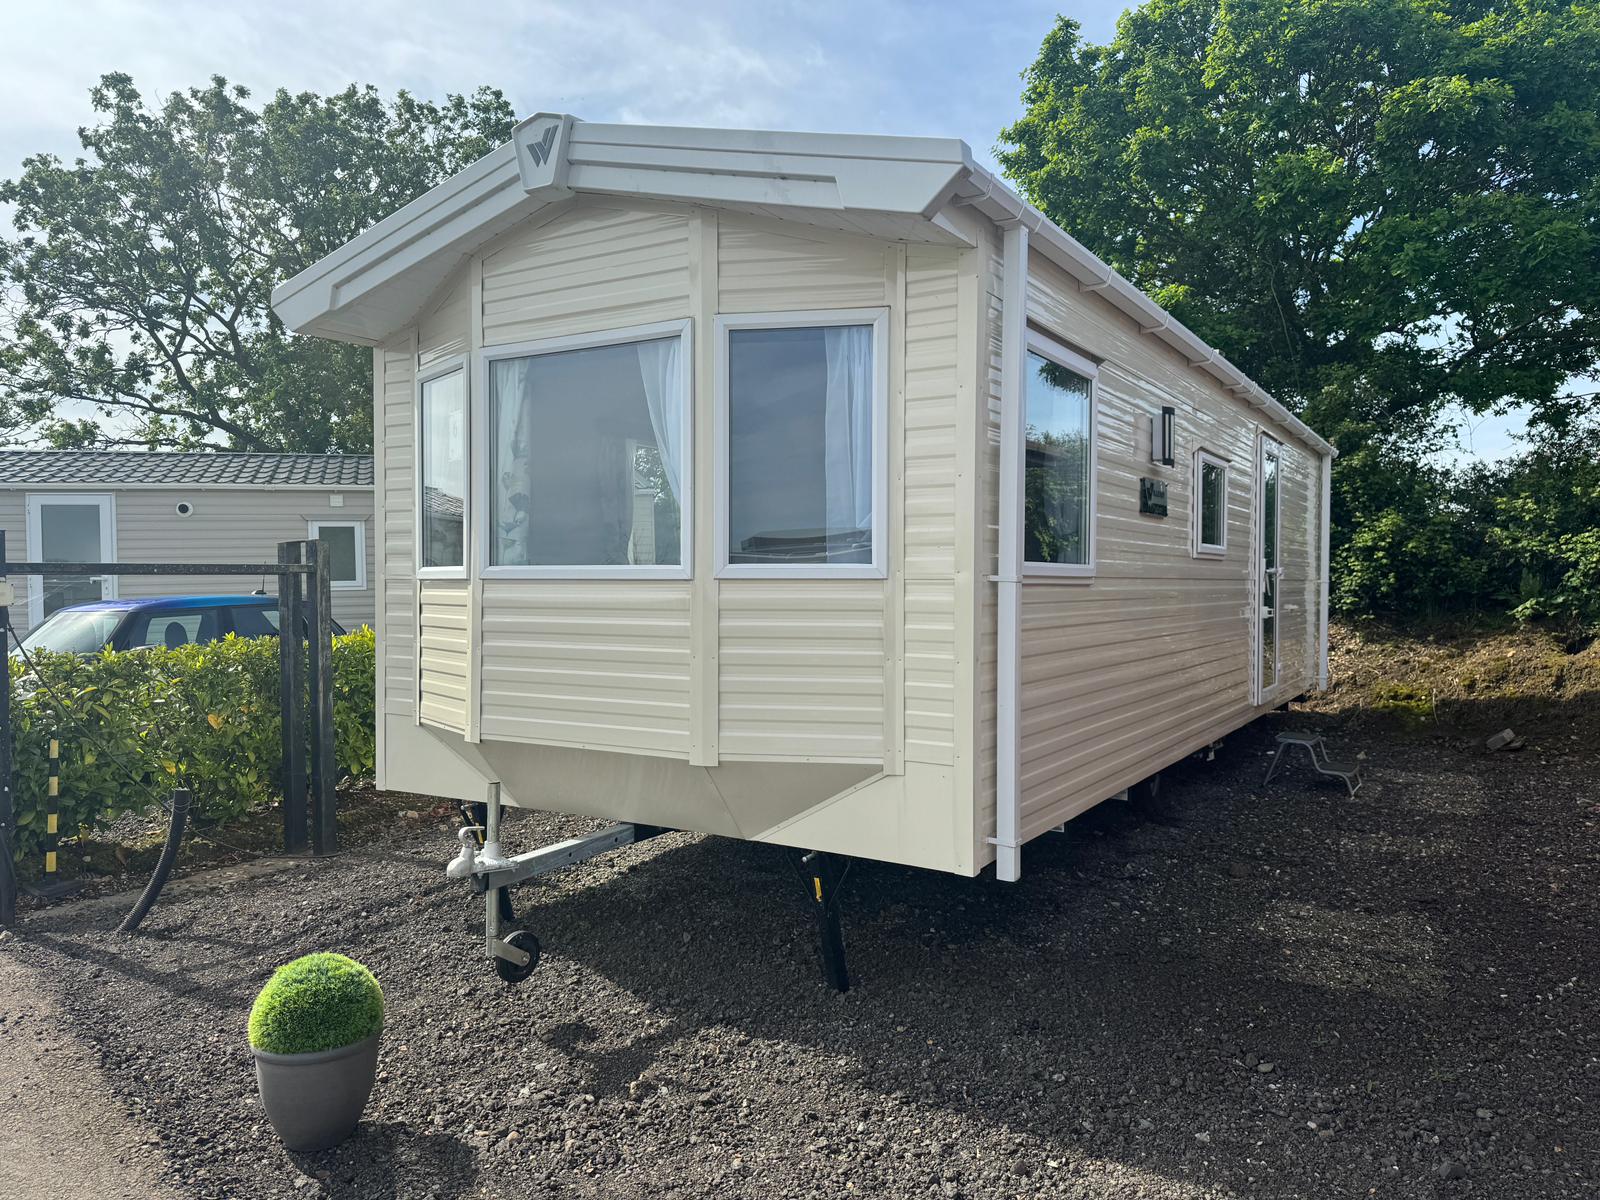 New Willerby Ashurst 28x10 2 bed static caravan